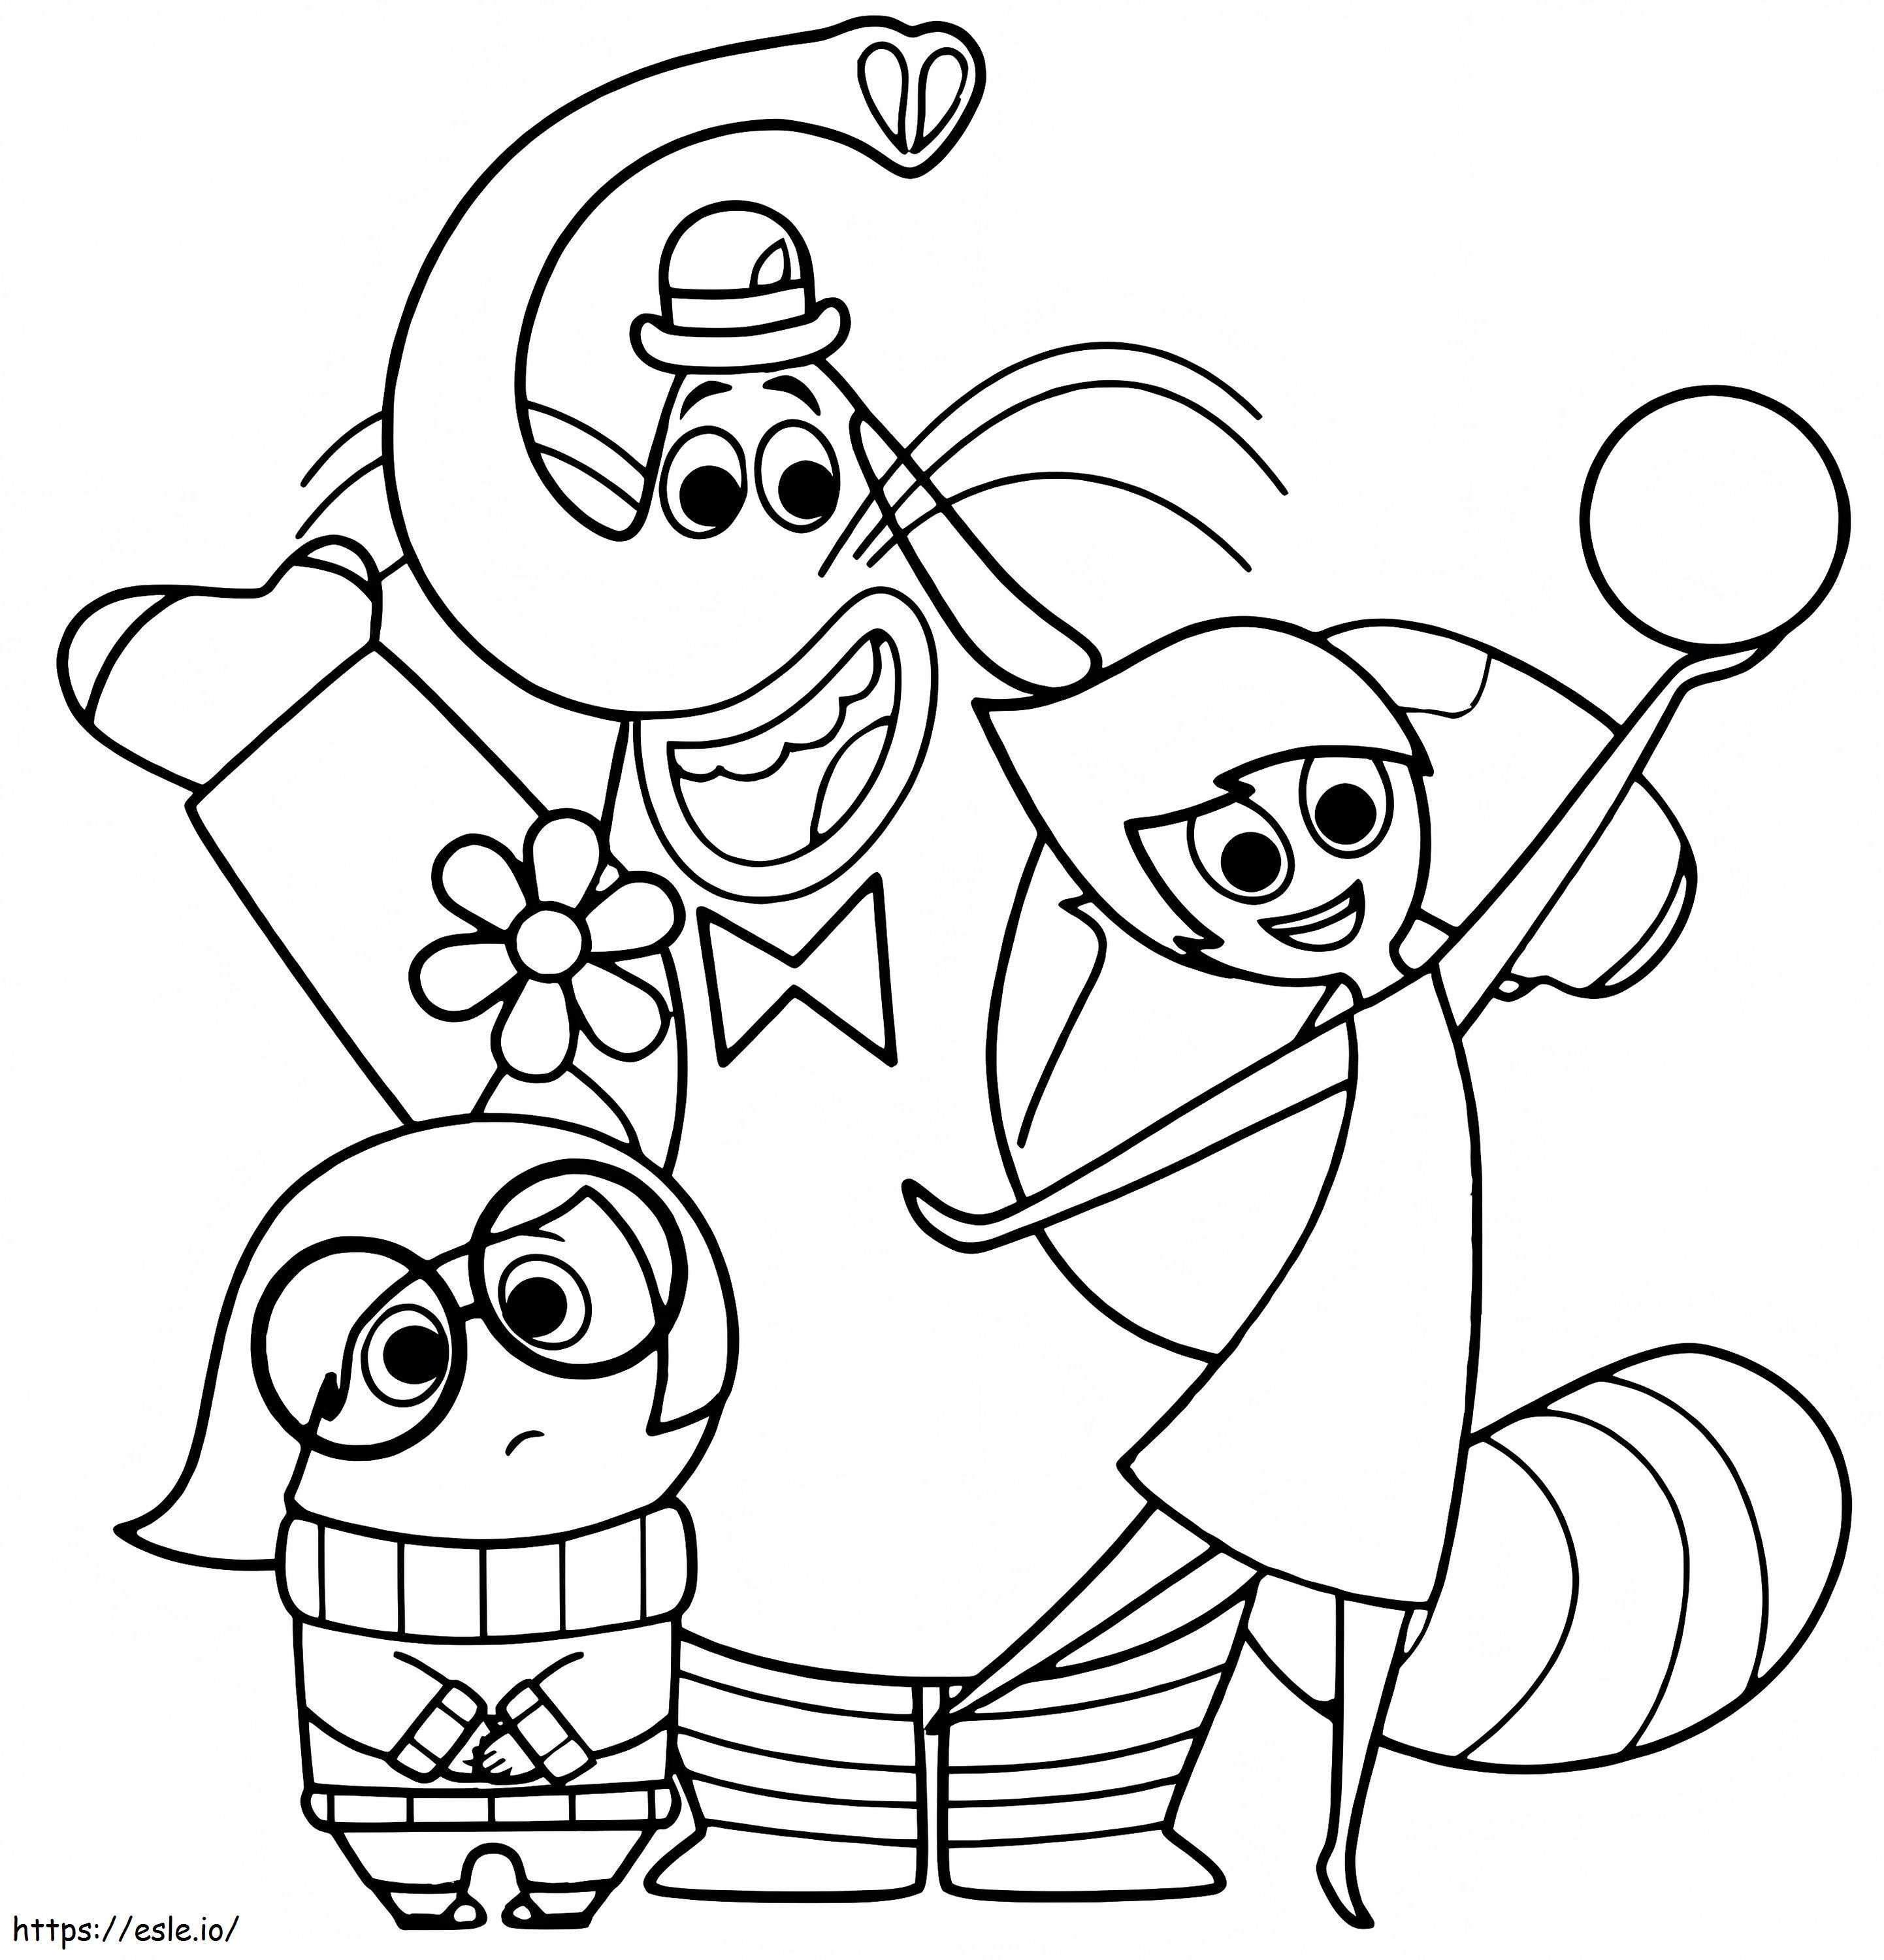 Characters From Inside Out 2 coloring page